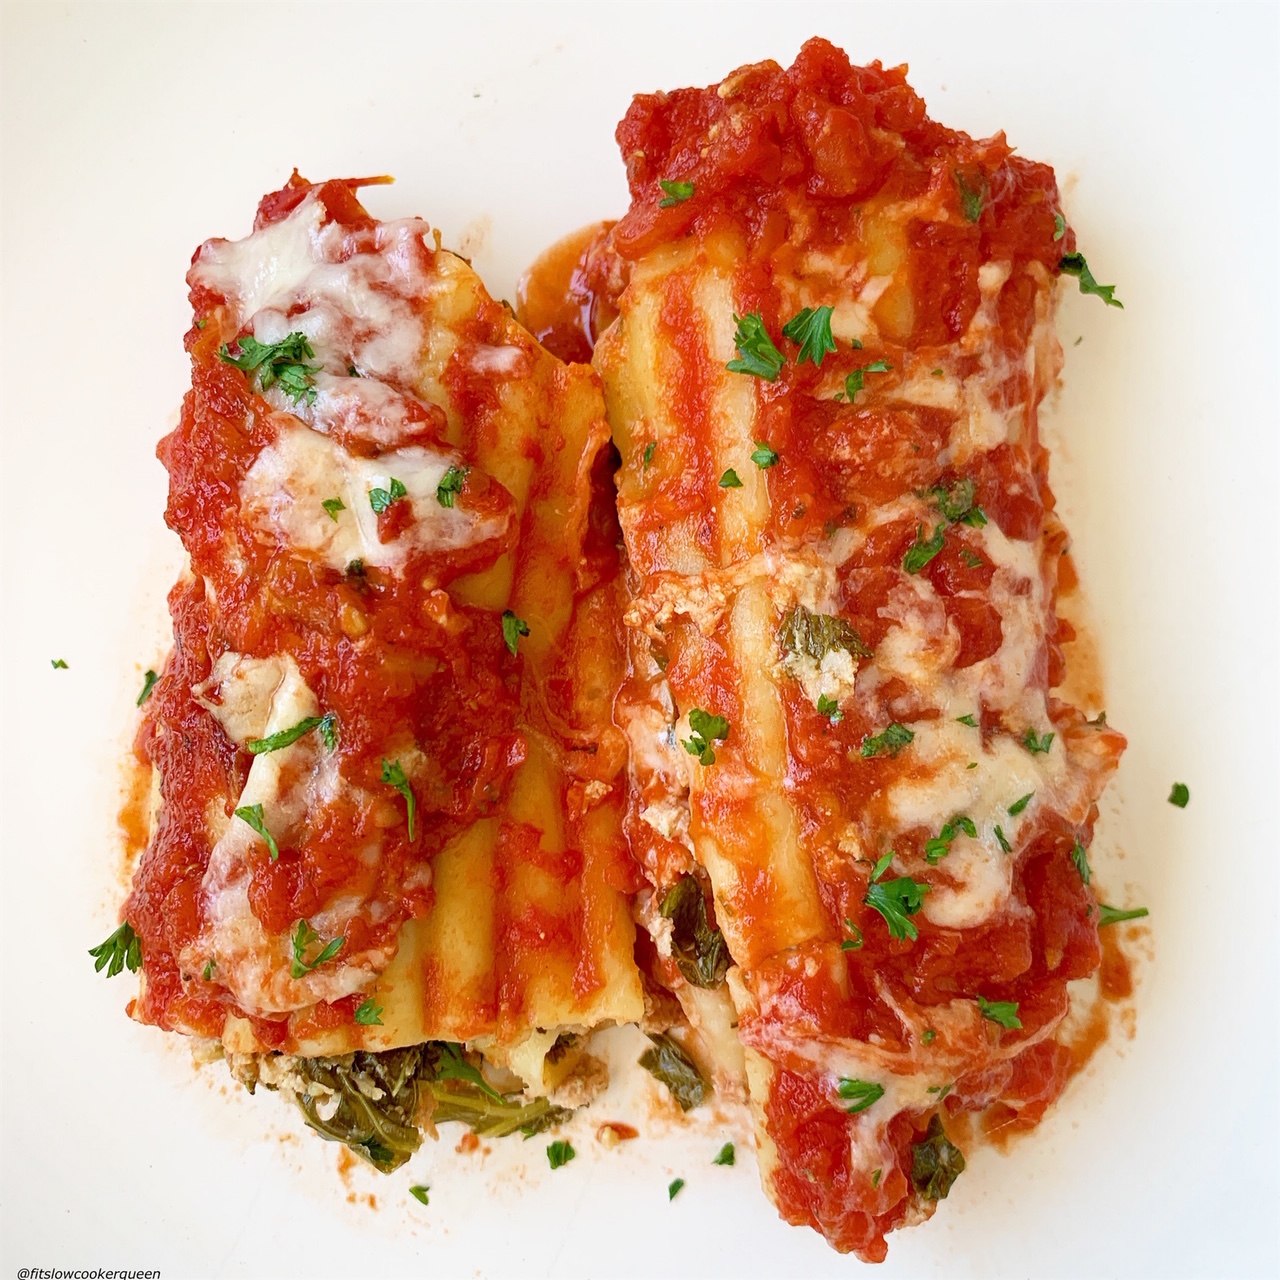 plated pic of slow cooker or instant pot stuffed manicotti